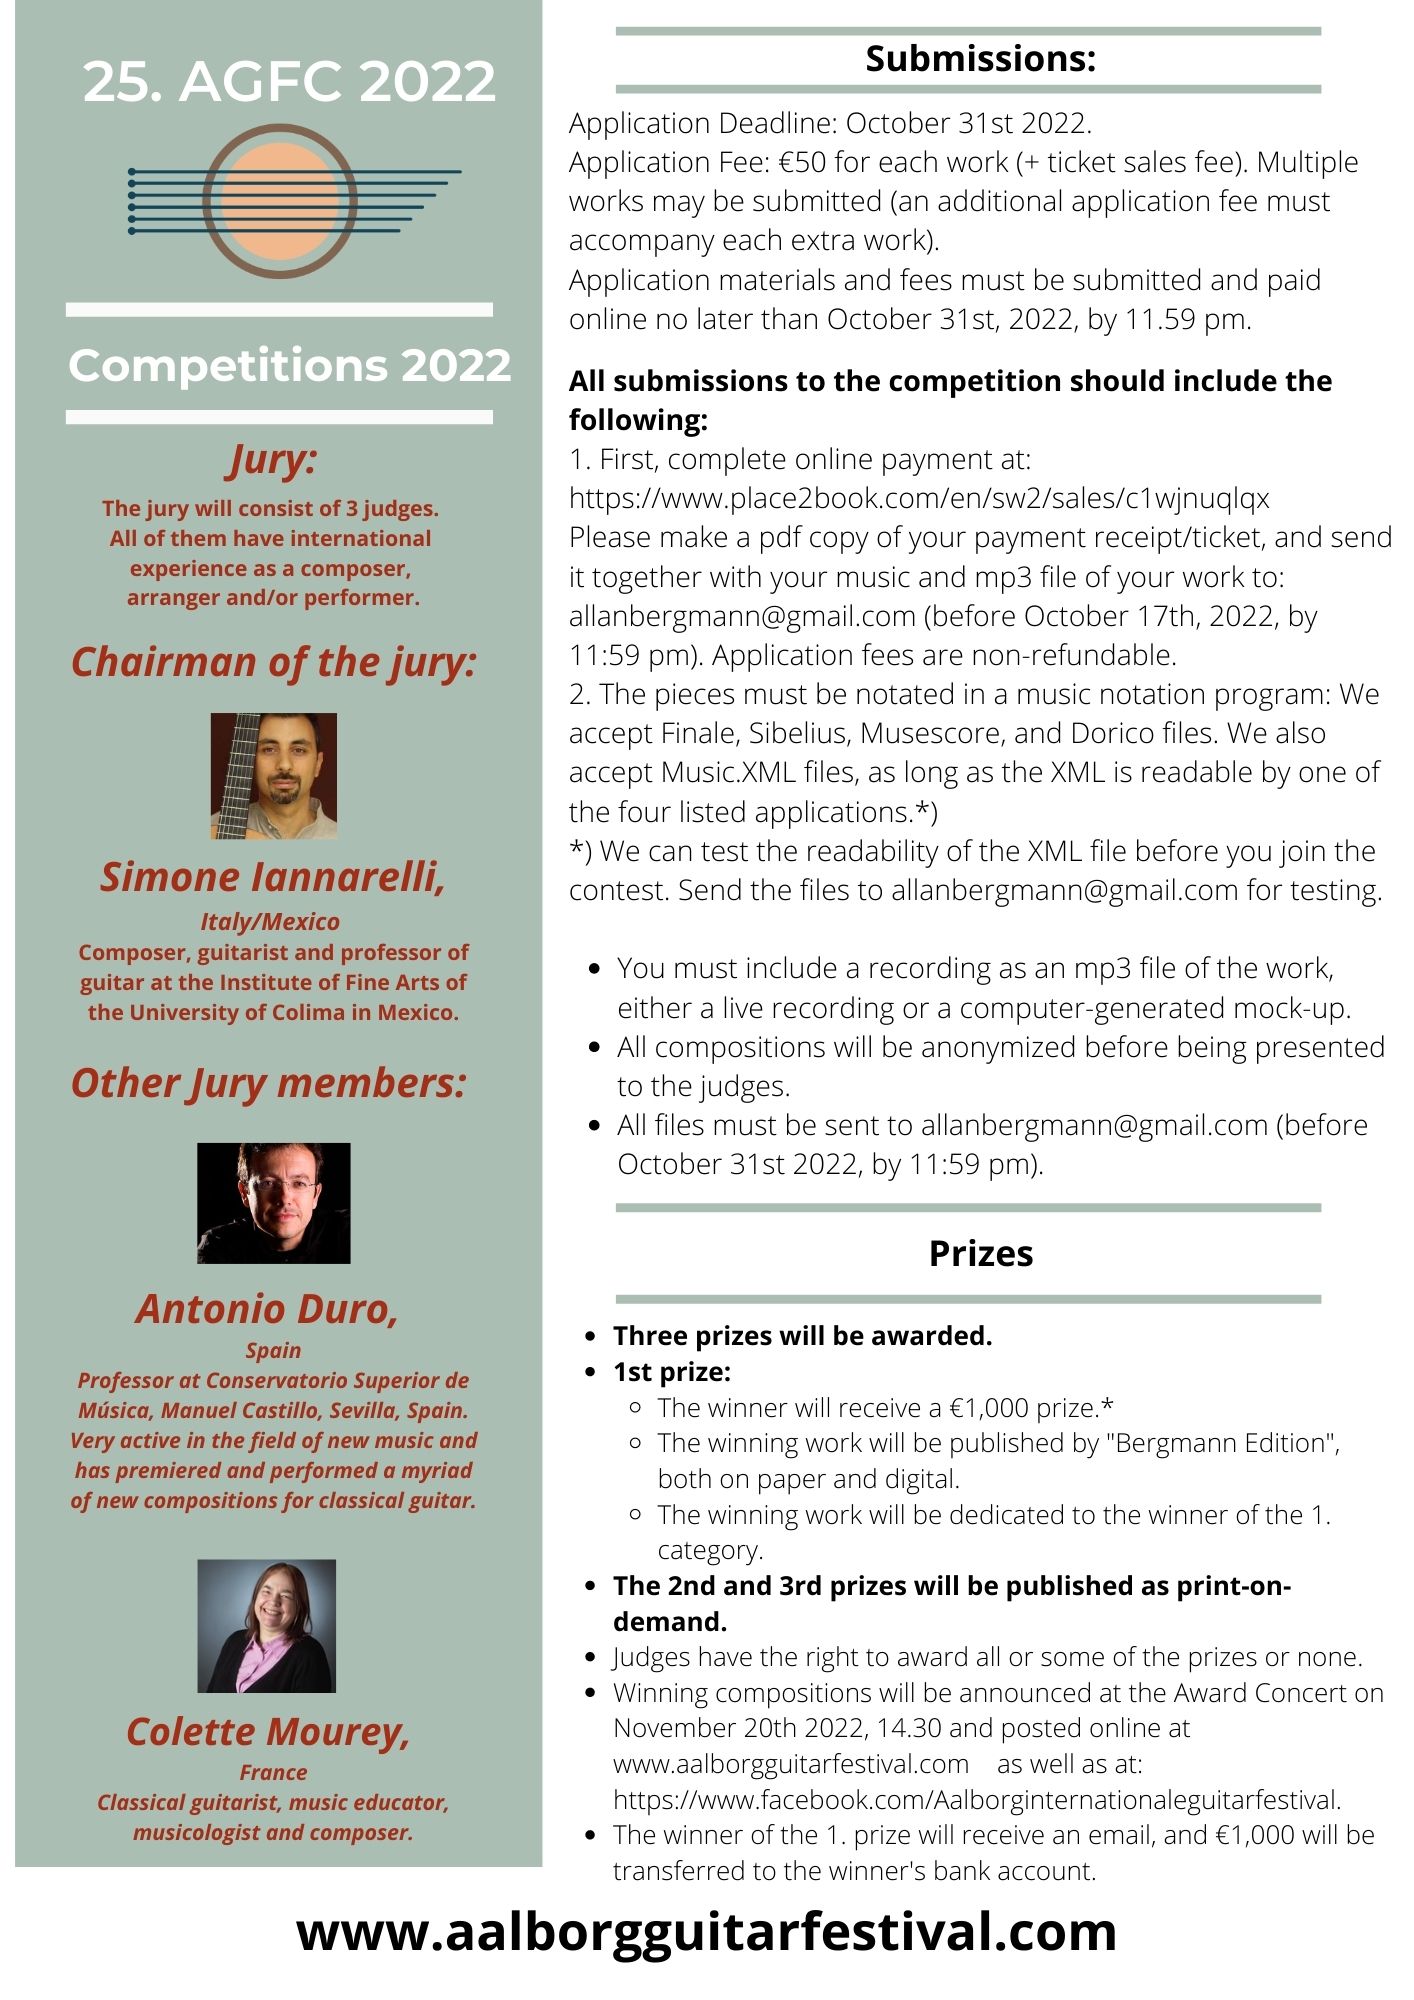 Composer Competition - image 2-9 on https://aalborgguitarfestival.com